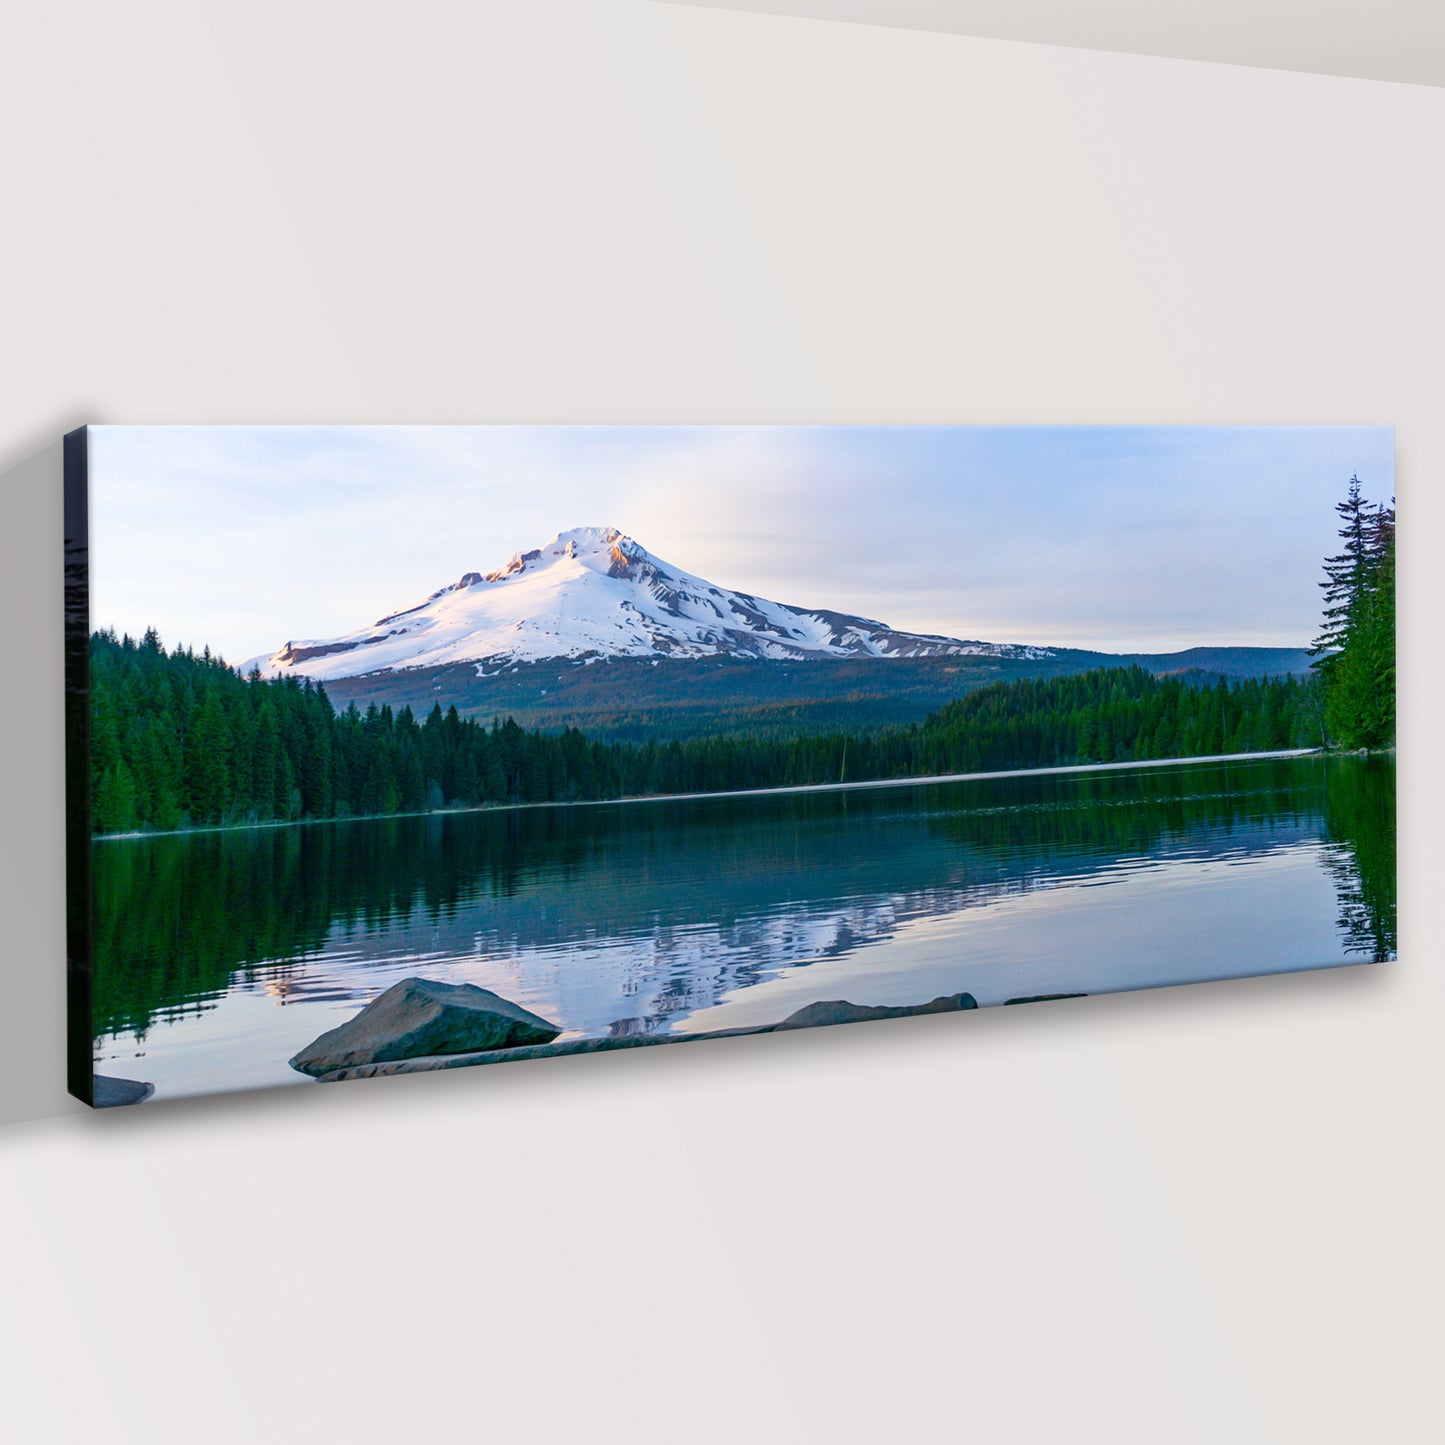 Mount Hood National Forest Panorama Canvas Wall Art Style 1 - Image by Tailored Canvases